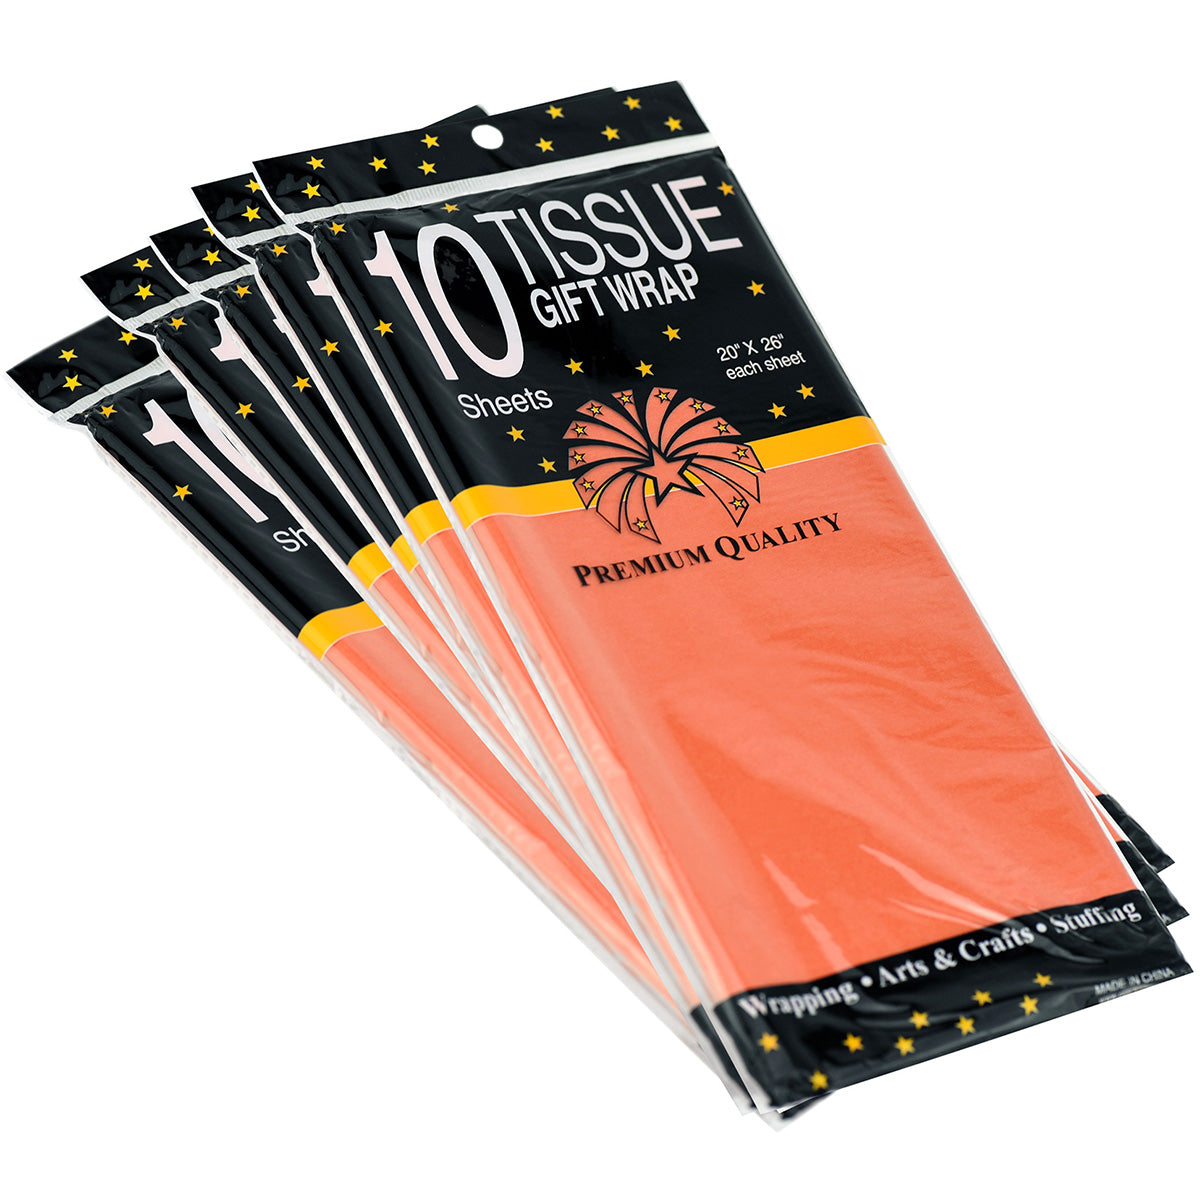 50 Sheets Orange Wrapping Tissue Paper